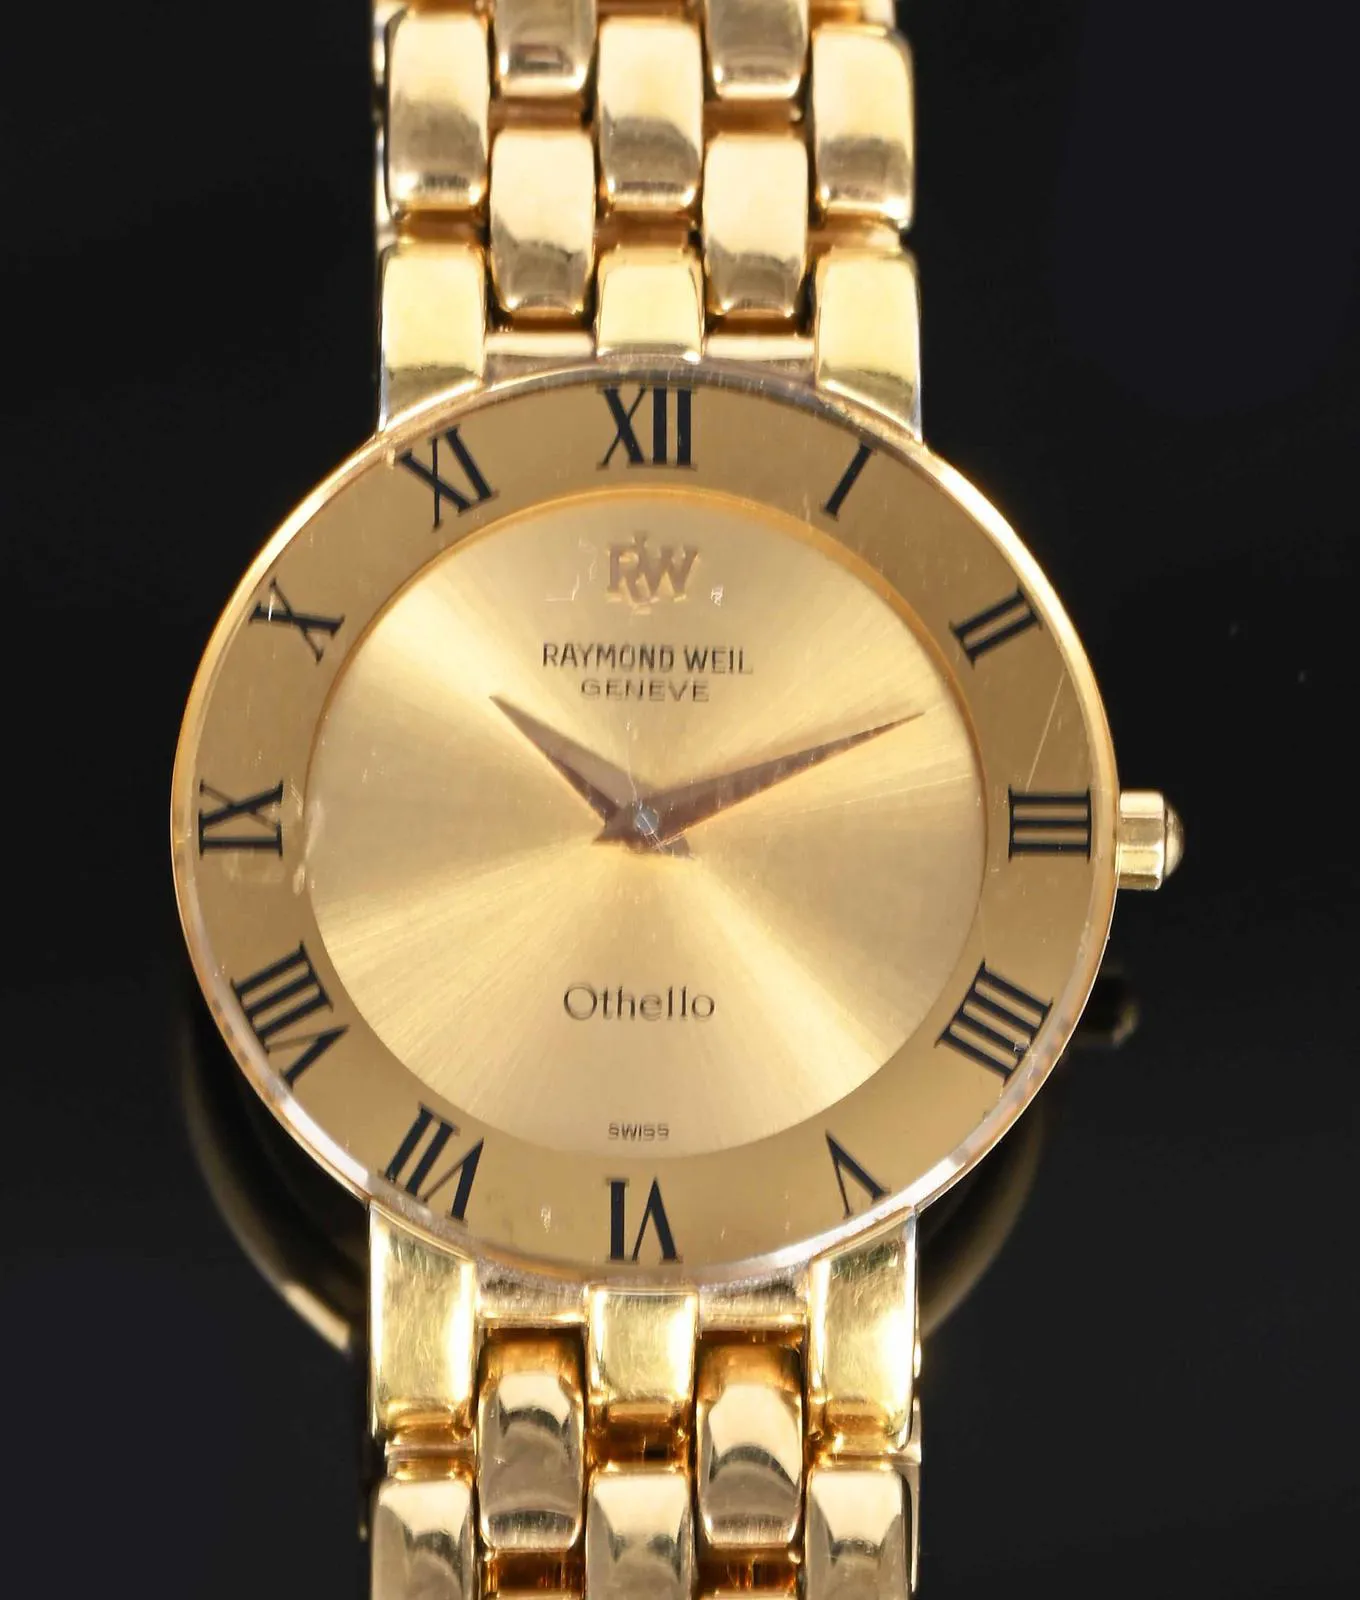 Raymond Weil Othello Electroplated Gold tone